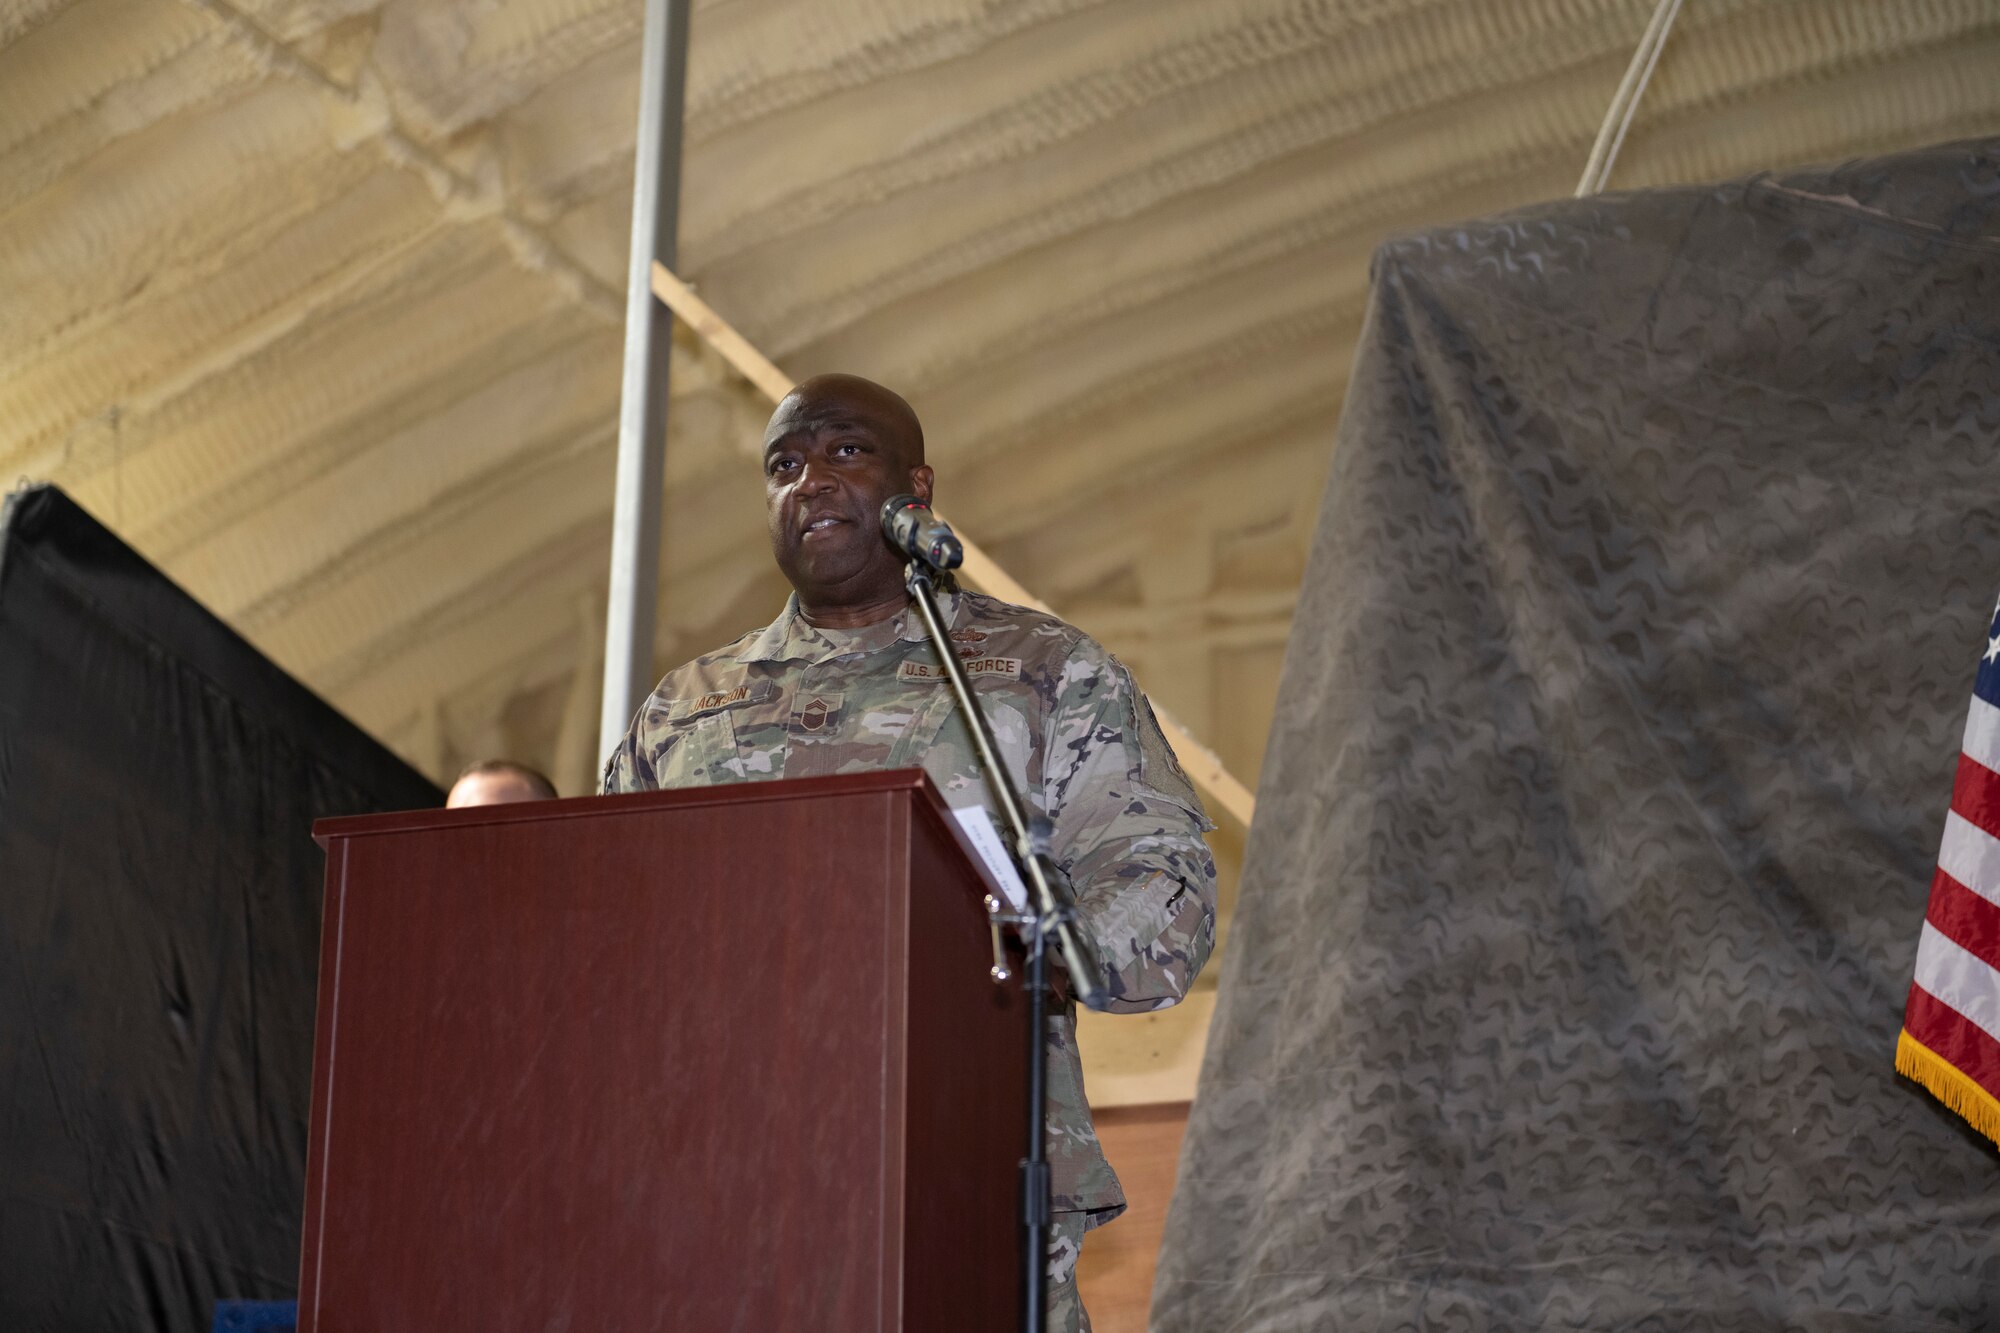 U.S. Air Force Chief Master Sgt. Charles Jackson, 332nd Expeditionary Operations Group command chief, speaks during a First Sergeant Symposium graduation Nov. 24, 2021, at an undisclosed location somewhere in Southwest Asia. A First Sergeant Symposium teaches technical sergeants and master sergeants the fundamentals to serve as interim first sergeants for their respective units. (U.S. Air Force photo by Senior Airman Cameron Otte)